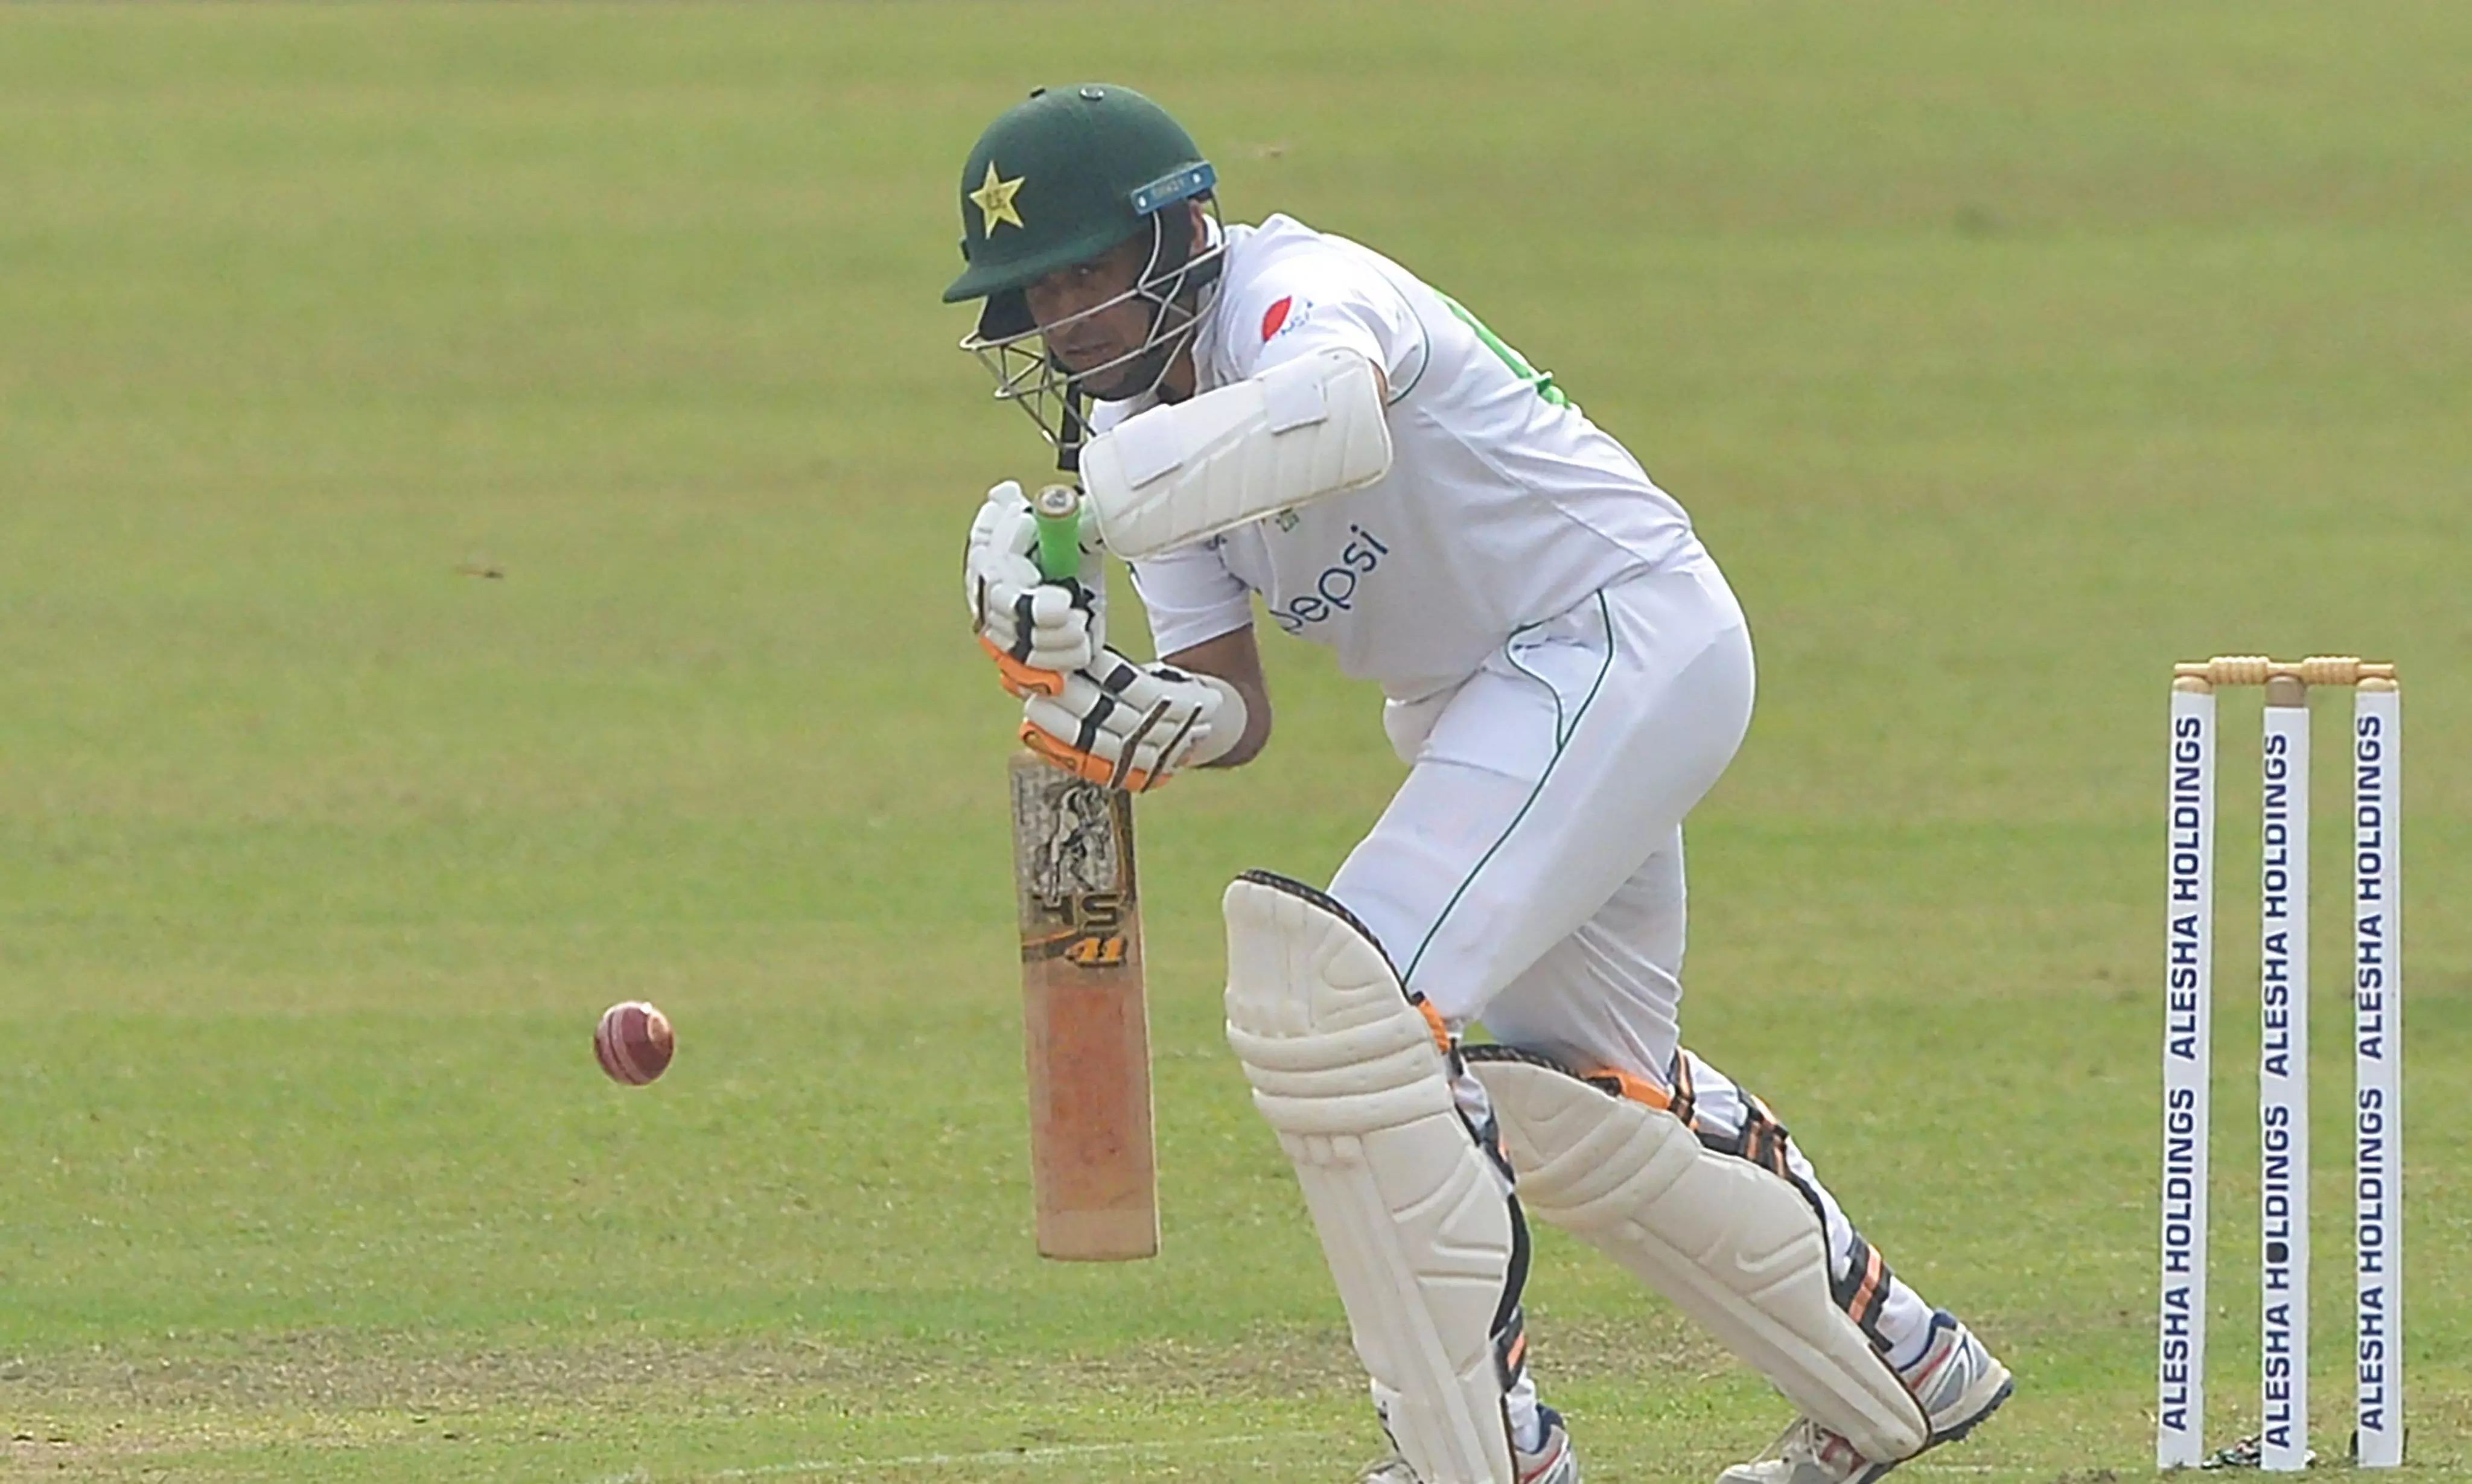 Pakistan 161/2 at stumps against Bangladesh on Day 1 of the second Test